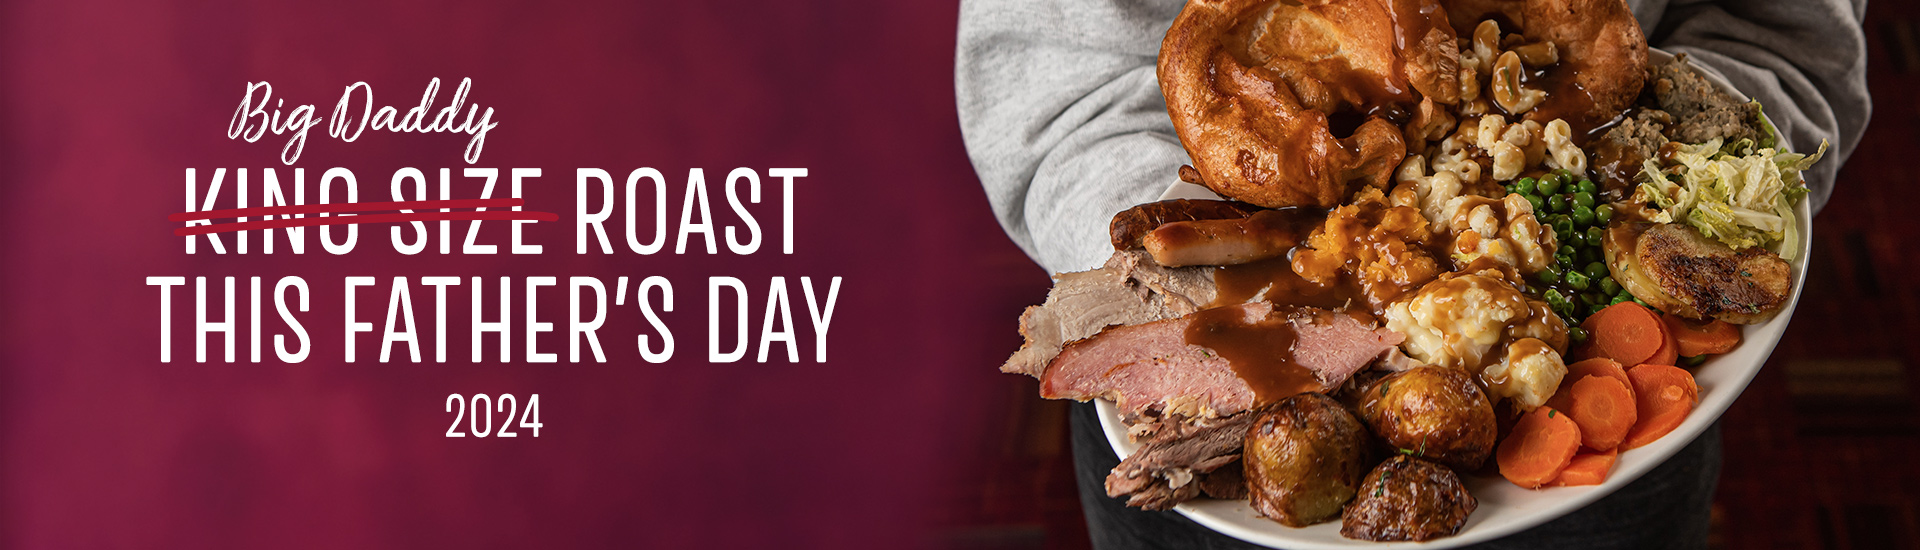 Father’s day carvery in Loughborough, Father’s day at Toby Carvery Loughborough